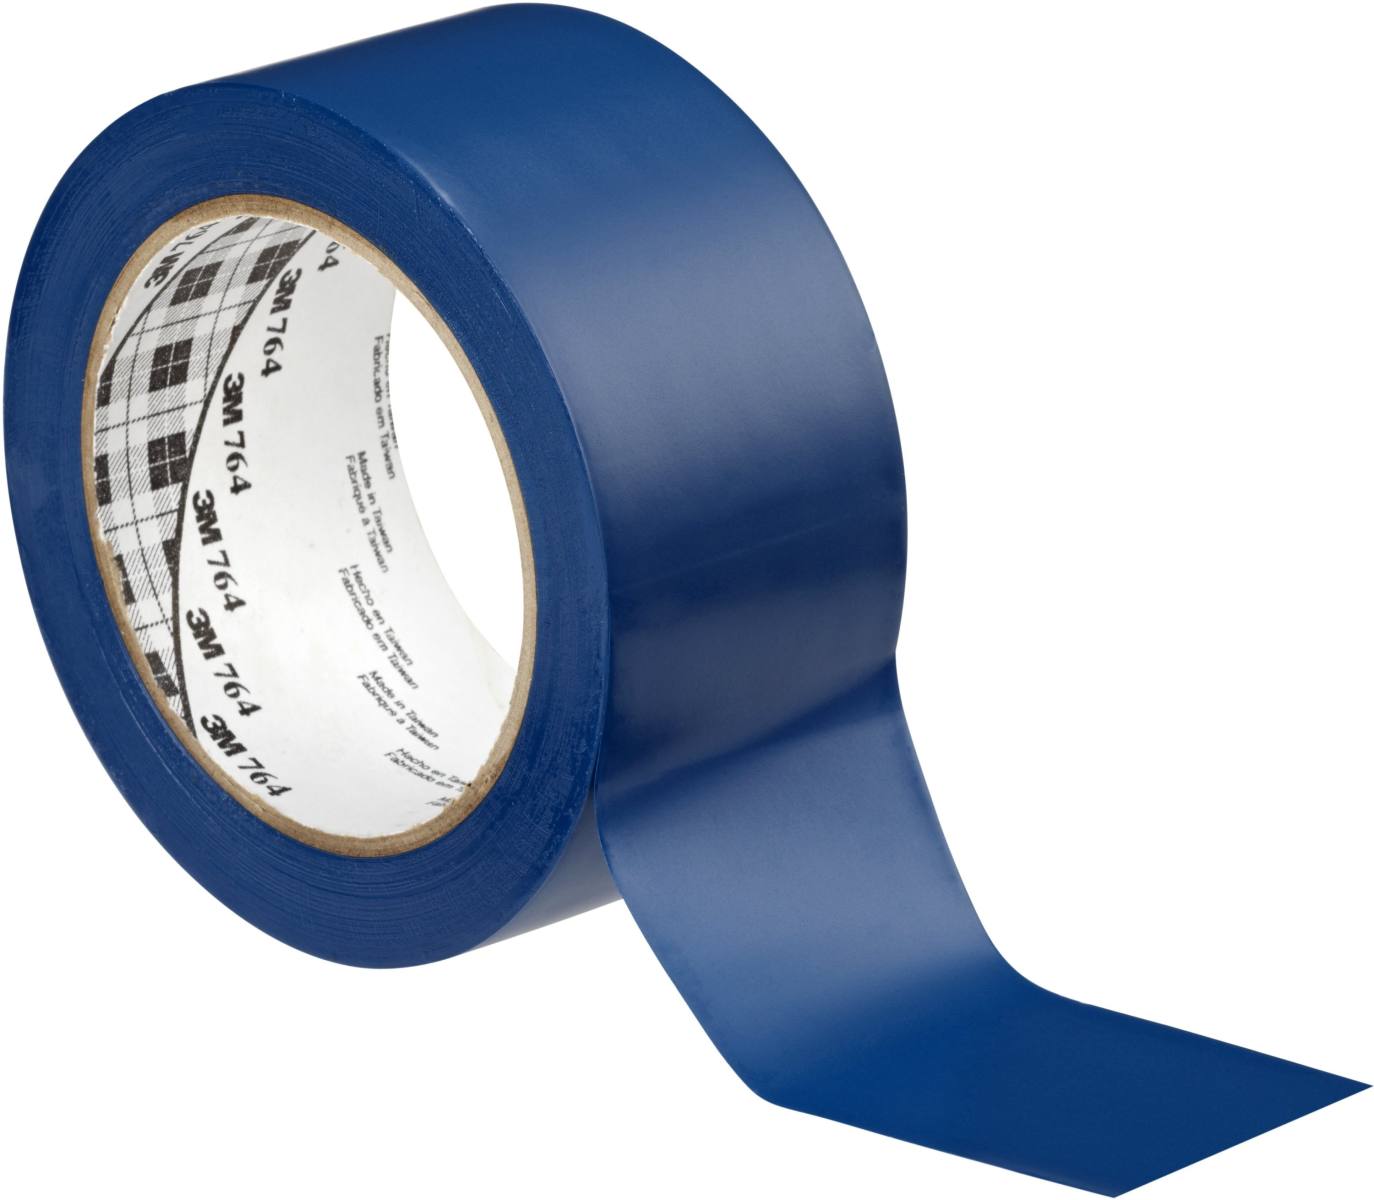 3M All-purpose PVC adhesive tape 764, blue, 50 mm x 33 m, individually and practically packed